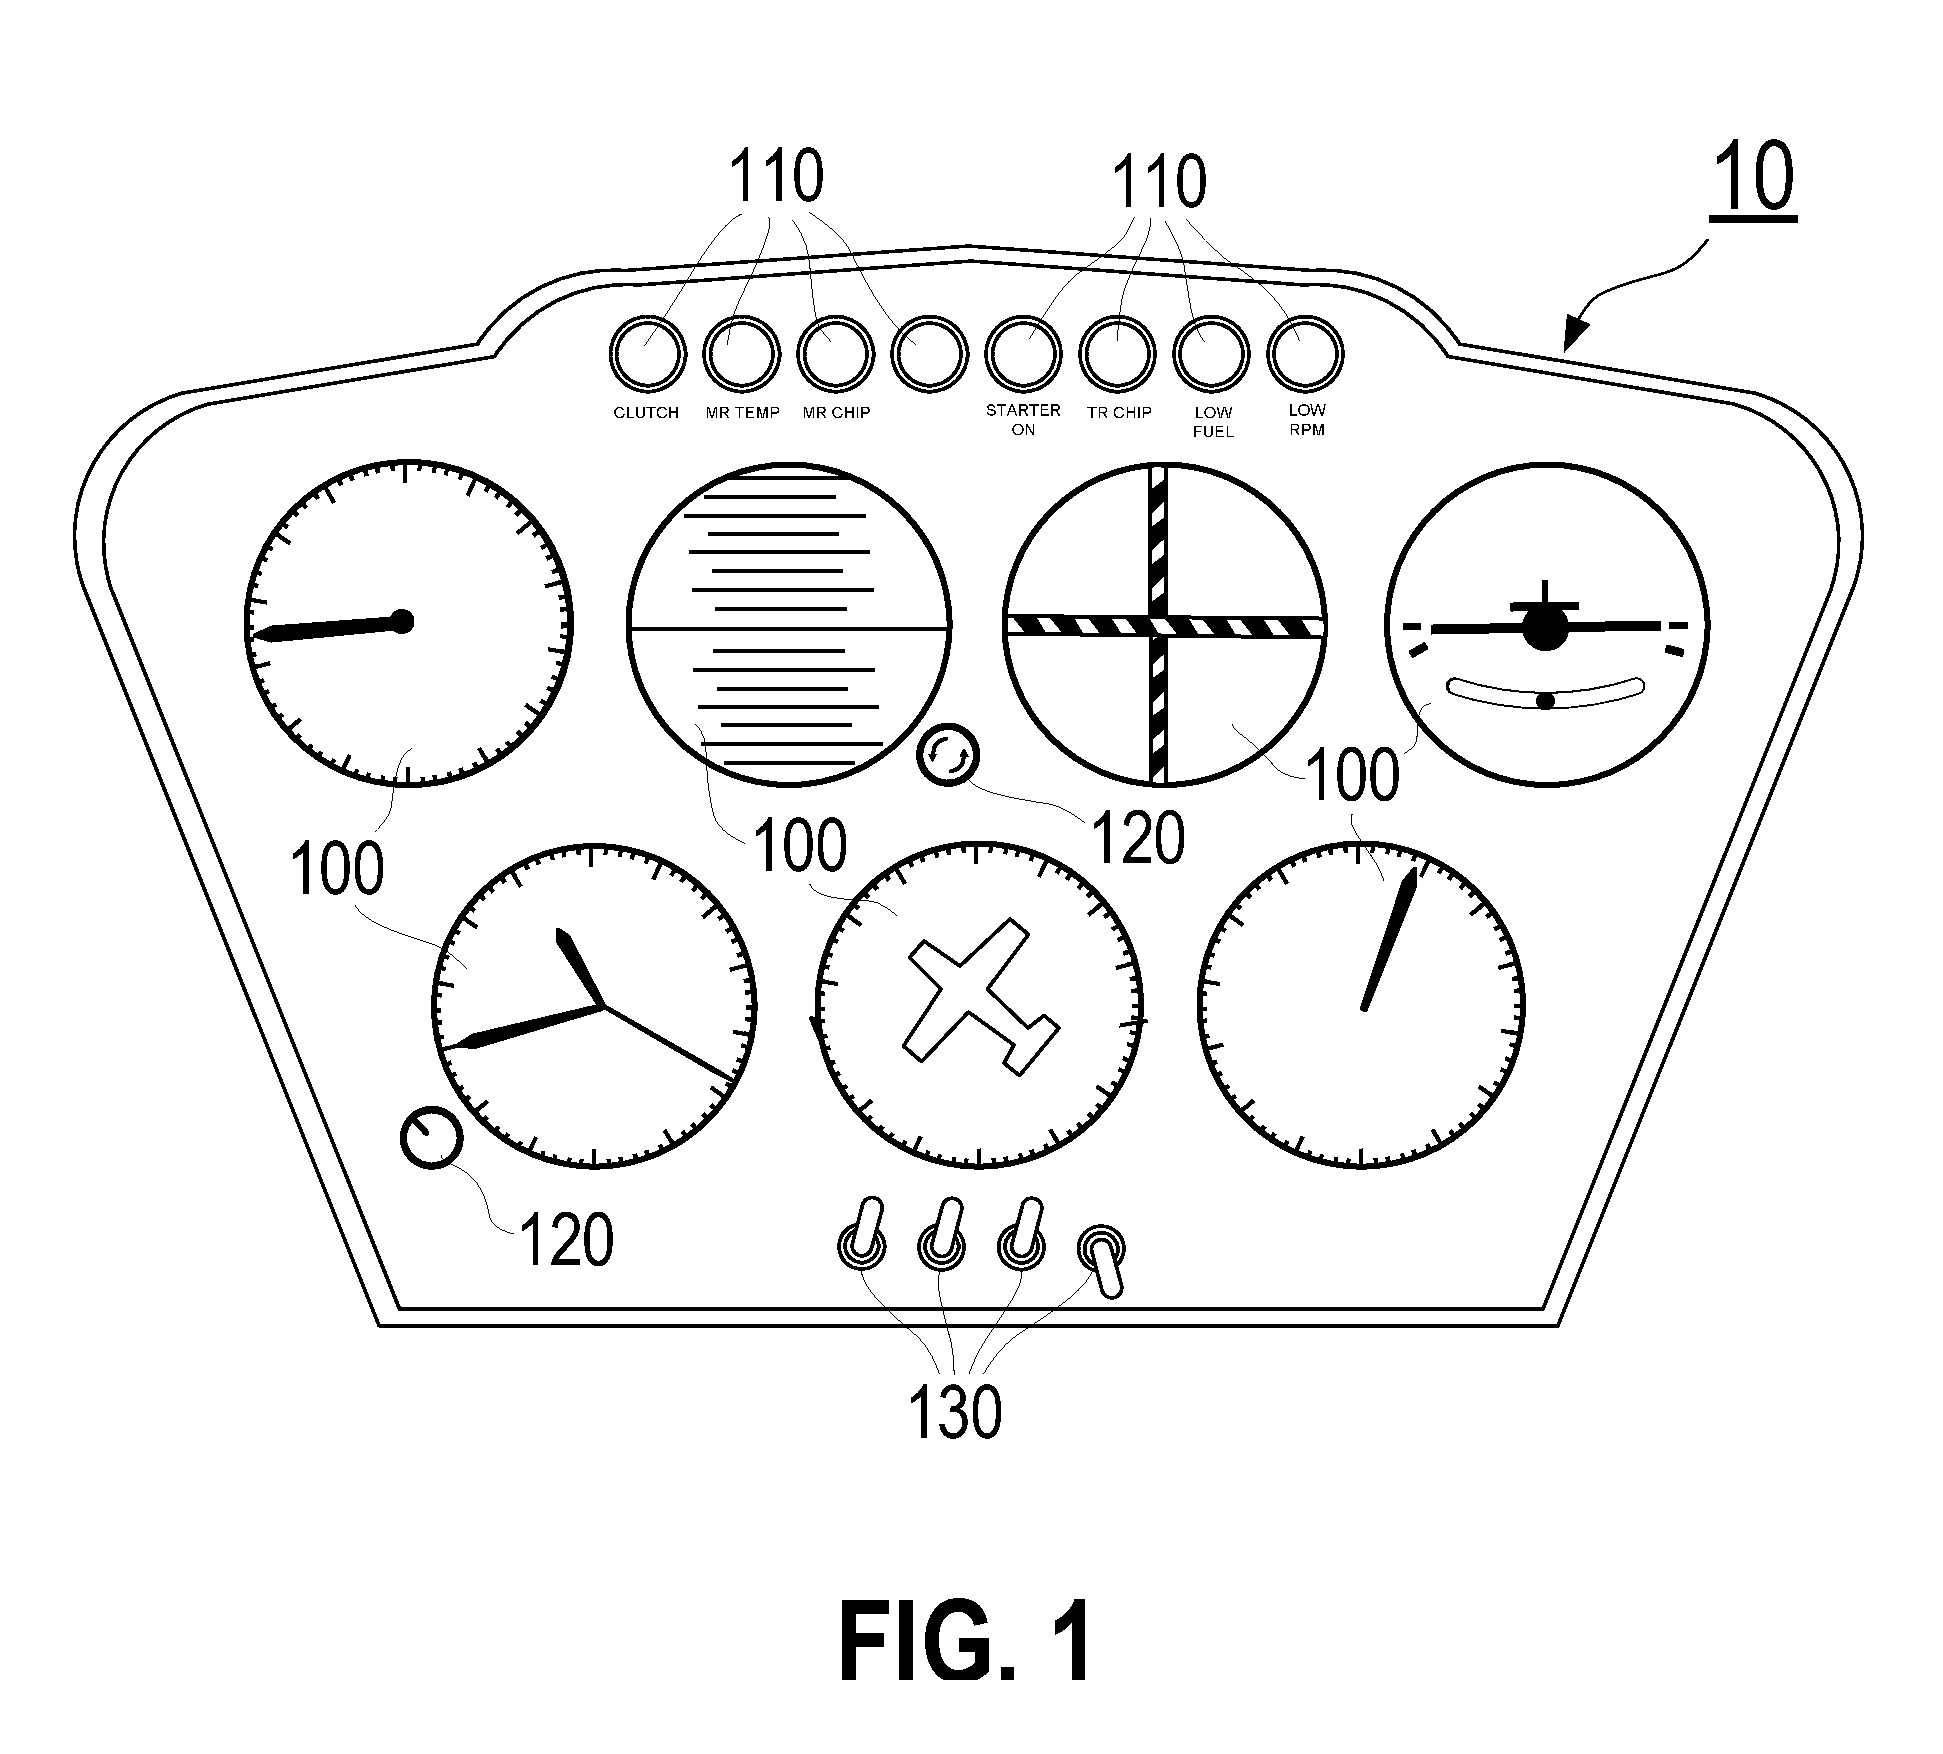 Optical image monitoring system and method for vehicles